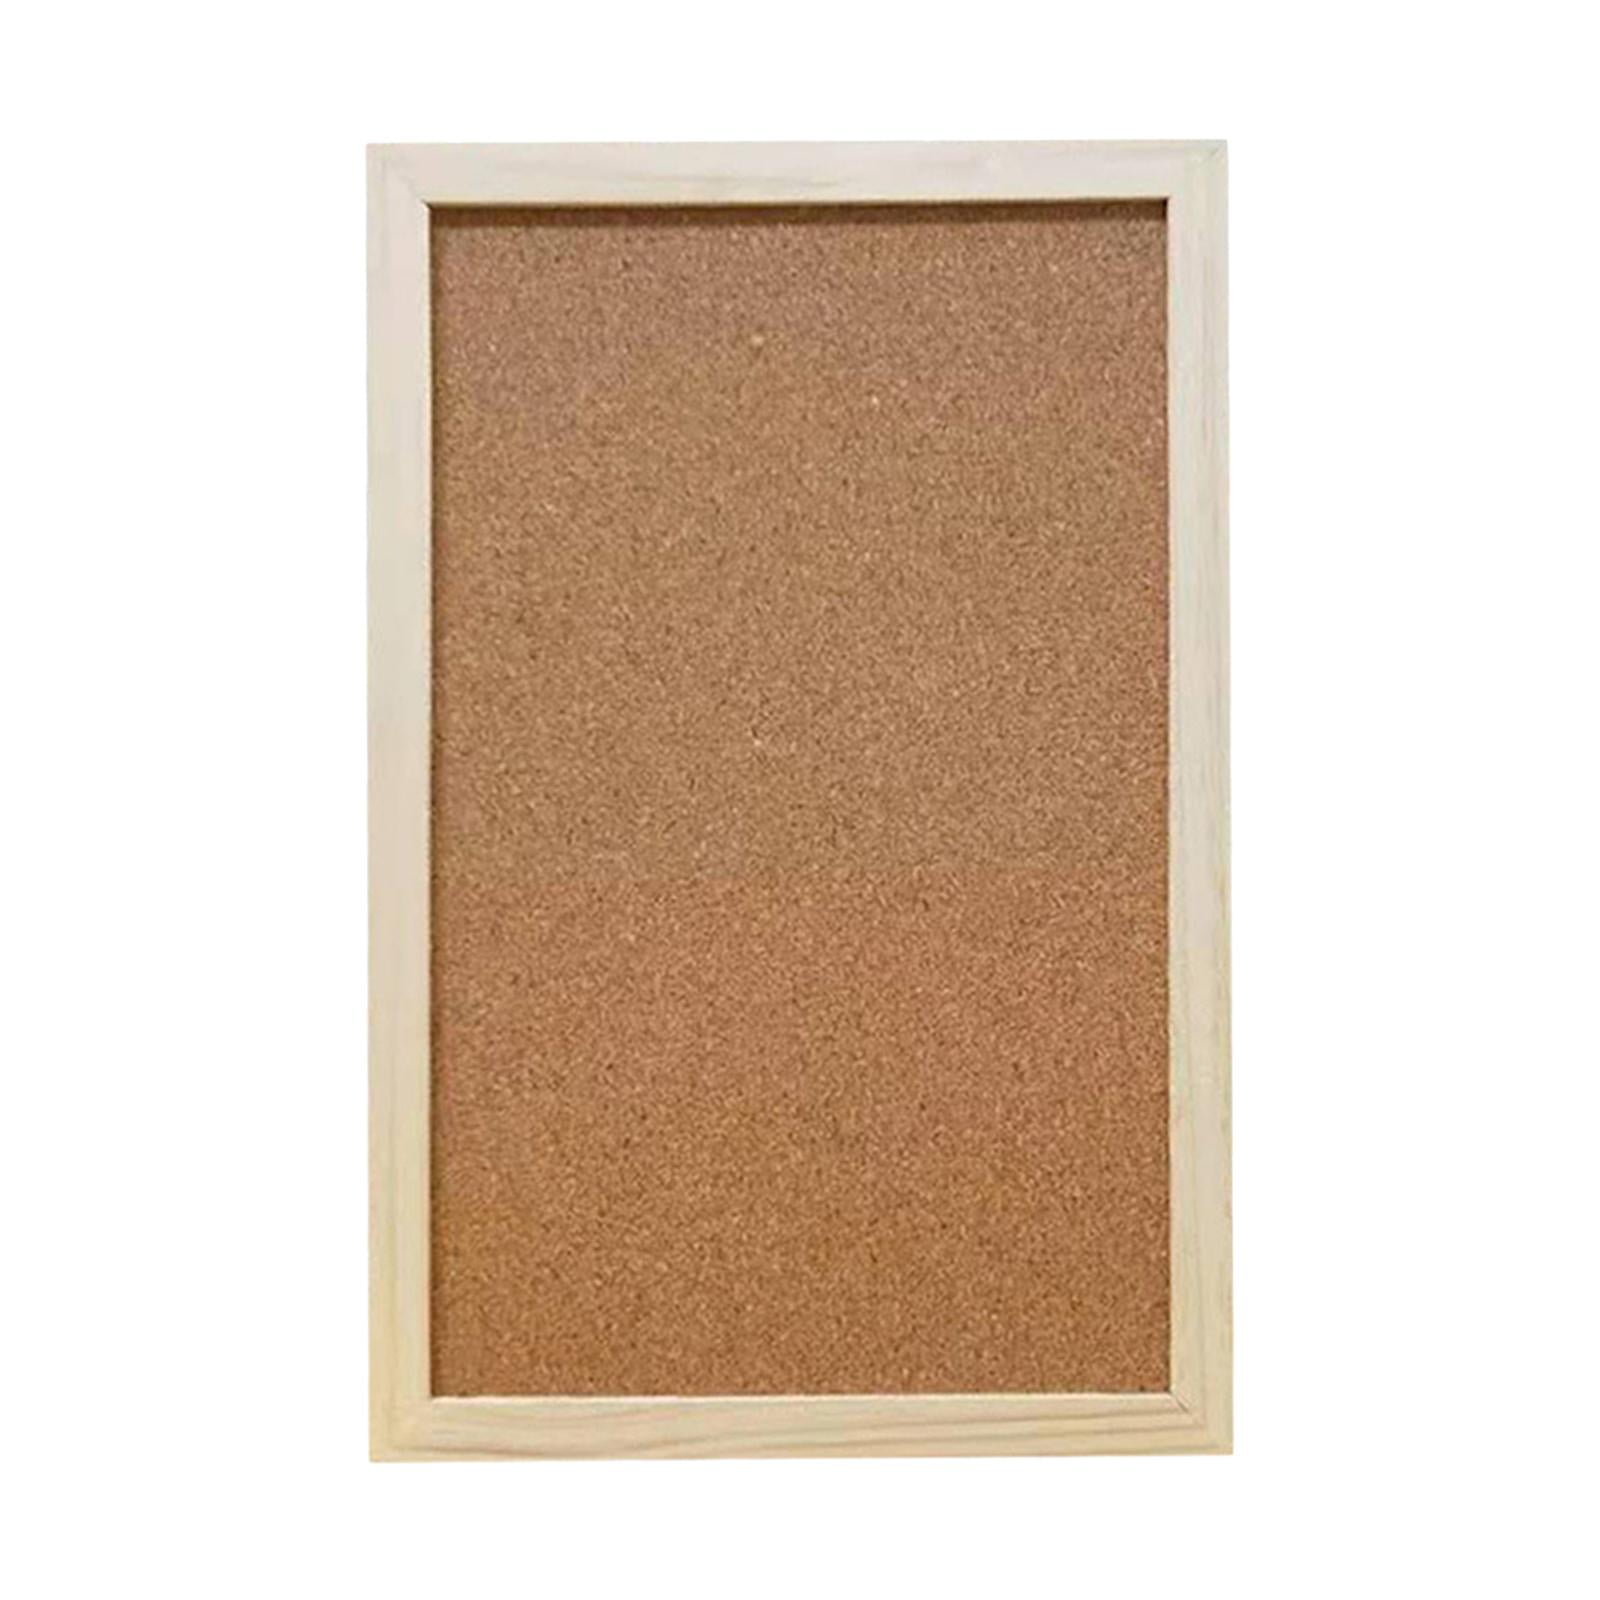 SUNGIFT Cork Board 12x12 - 1/2 Thick Square Bulletin Boards 6 Pack Cork  Tiles with 50 Push Pins Mini Wall Self-Adhesive Corkboards Tiles for Wall